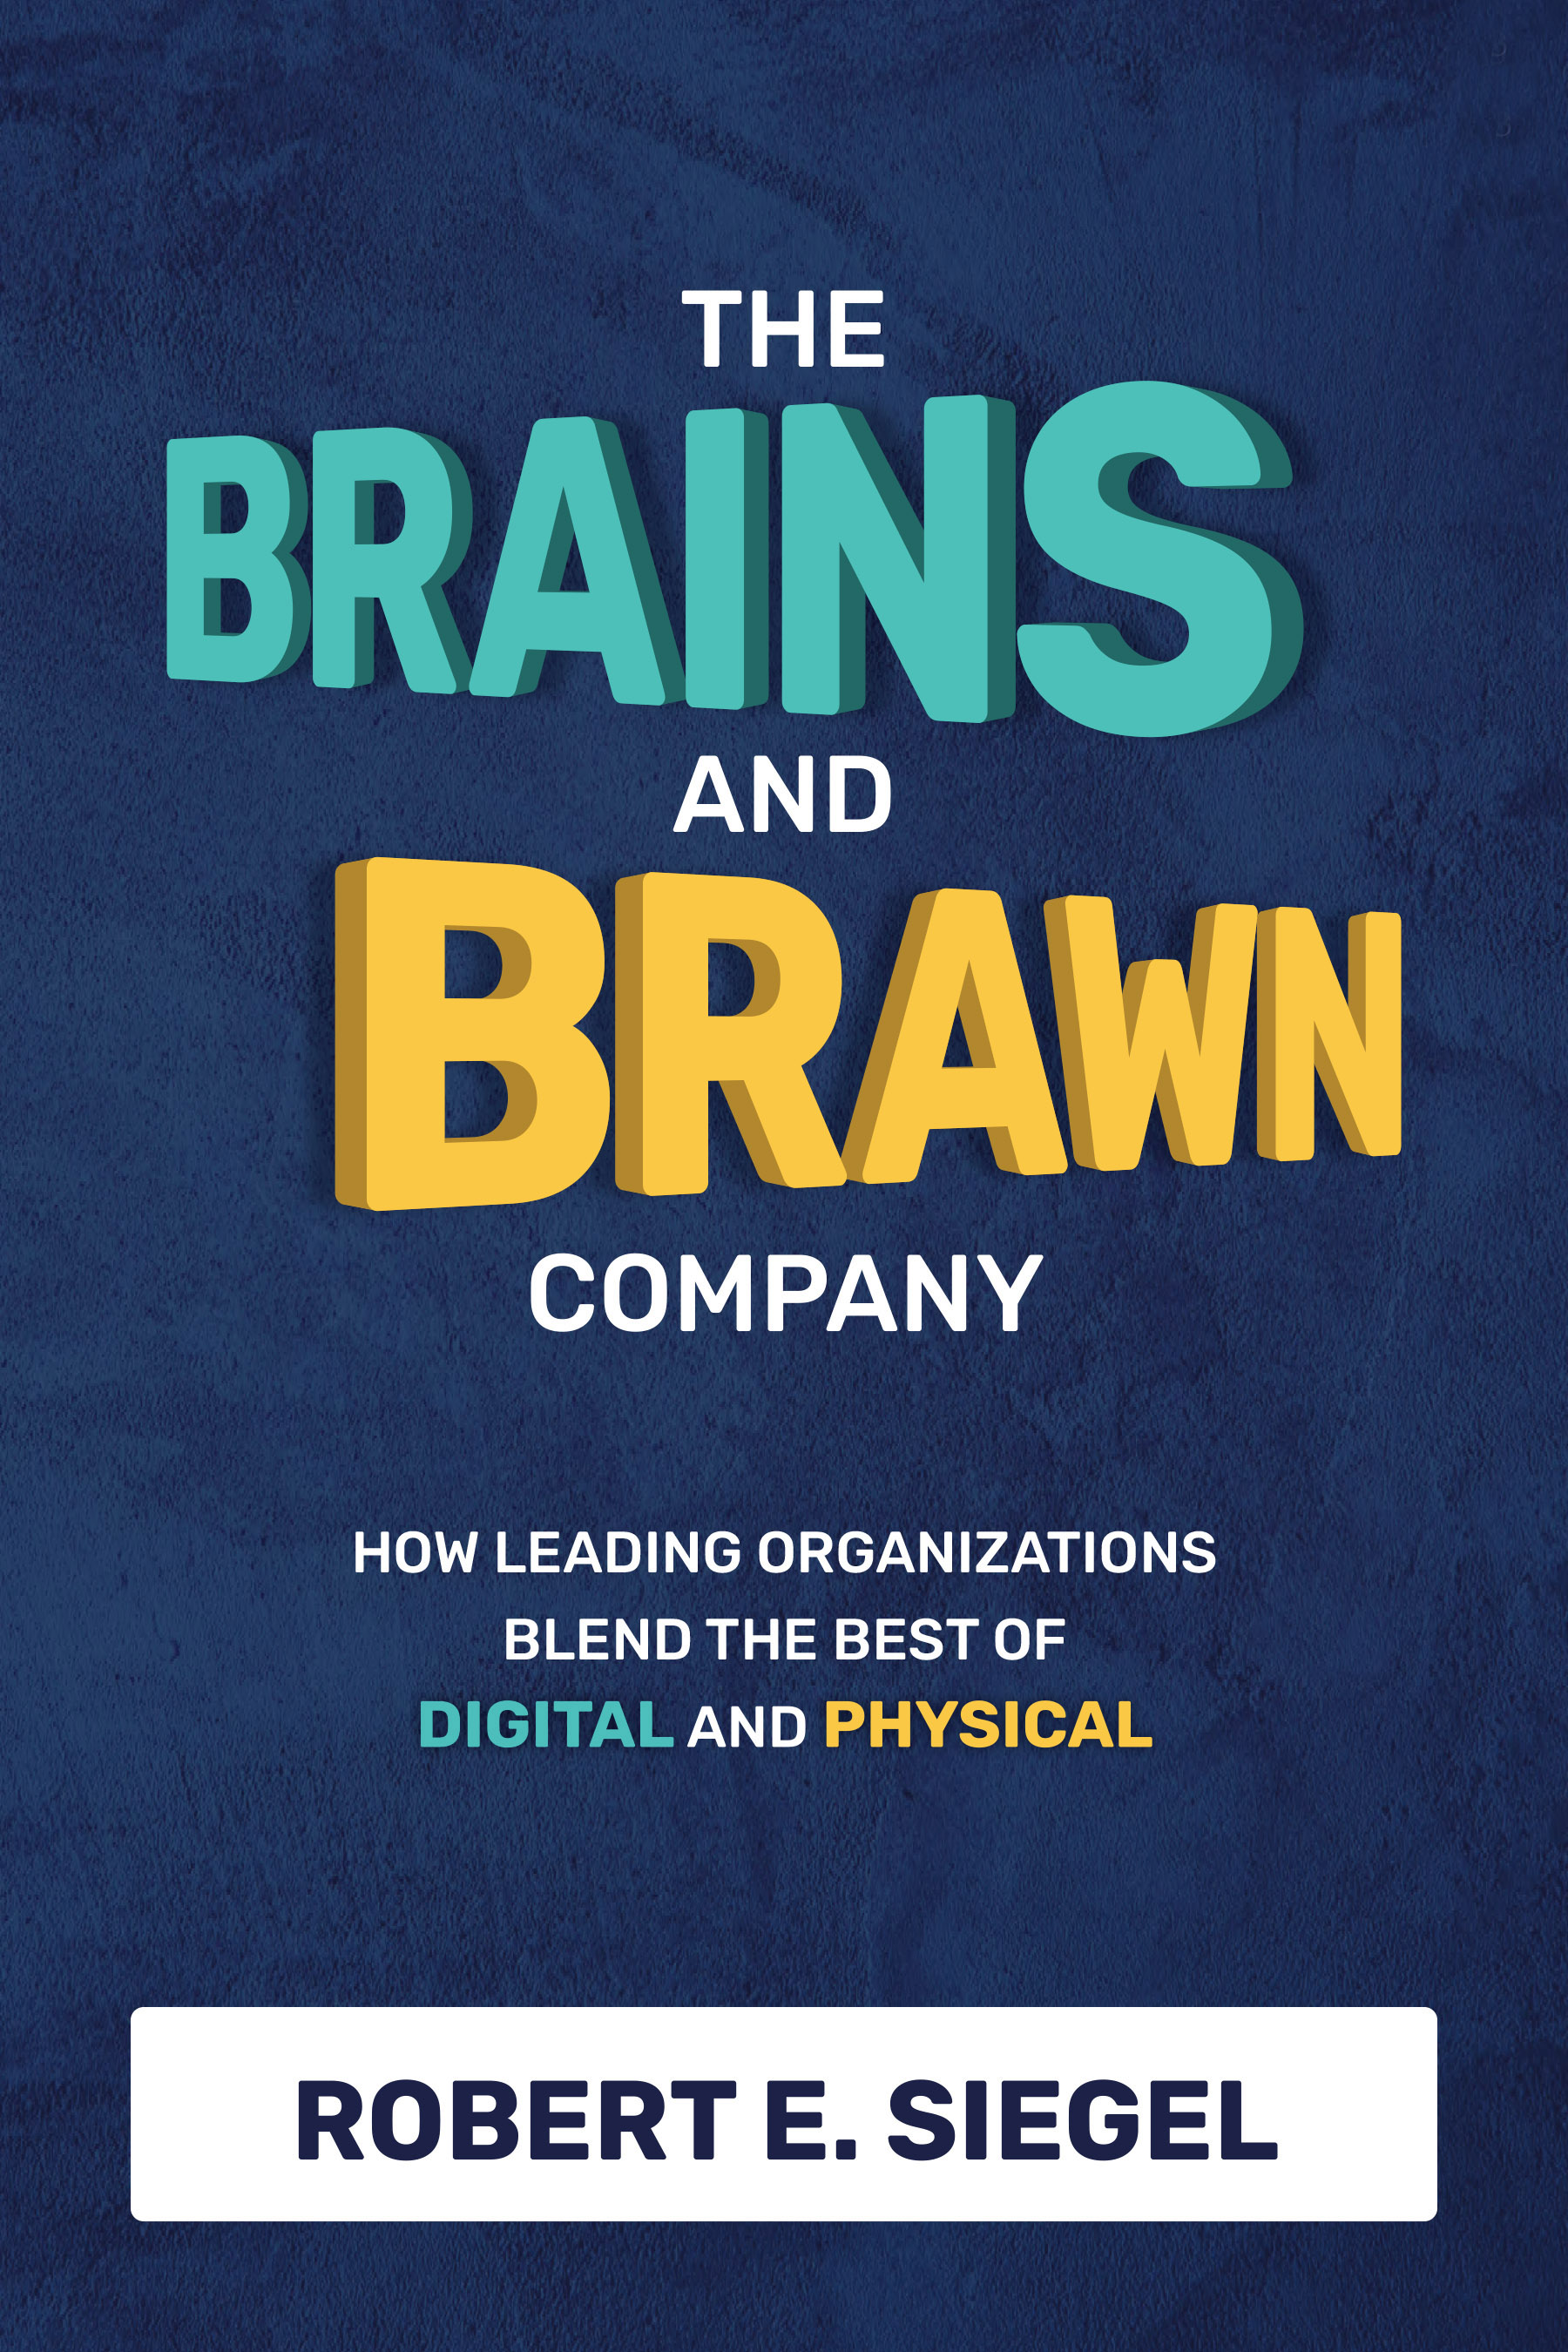 The Brains and Brawn Company: How Leading Organizations Blend the Best of Digital and Physical